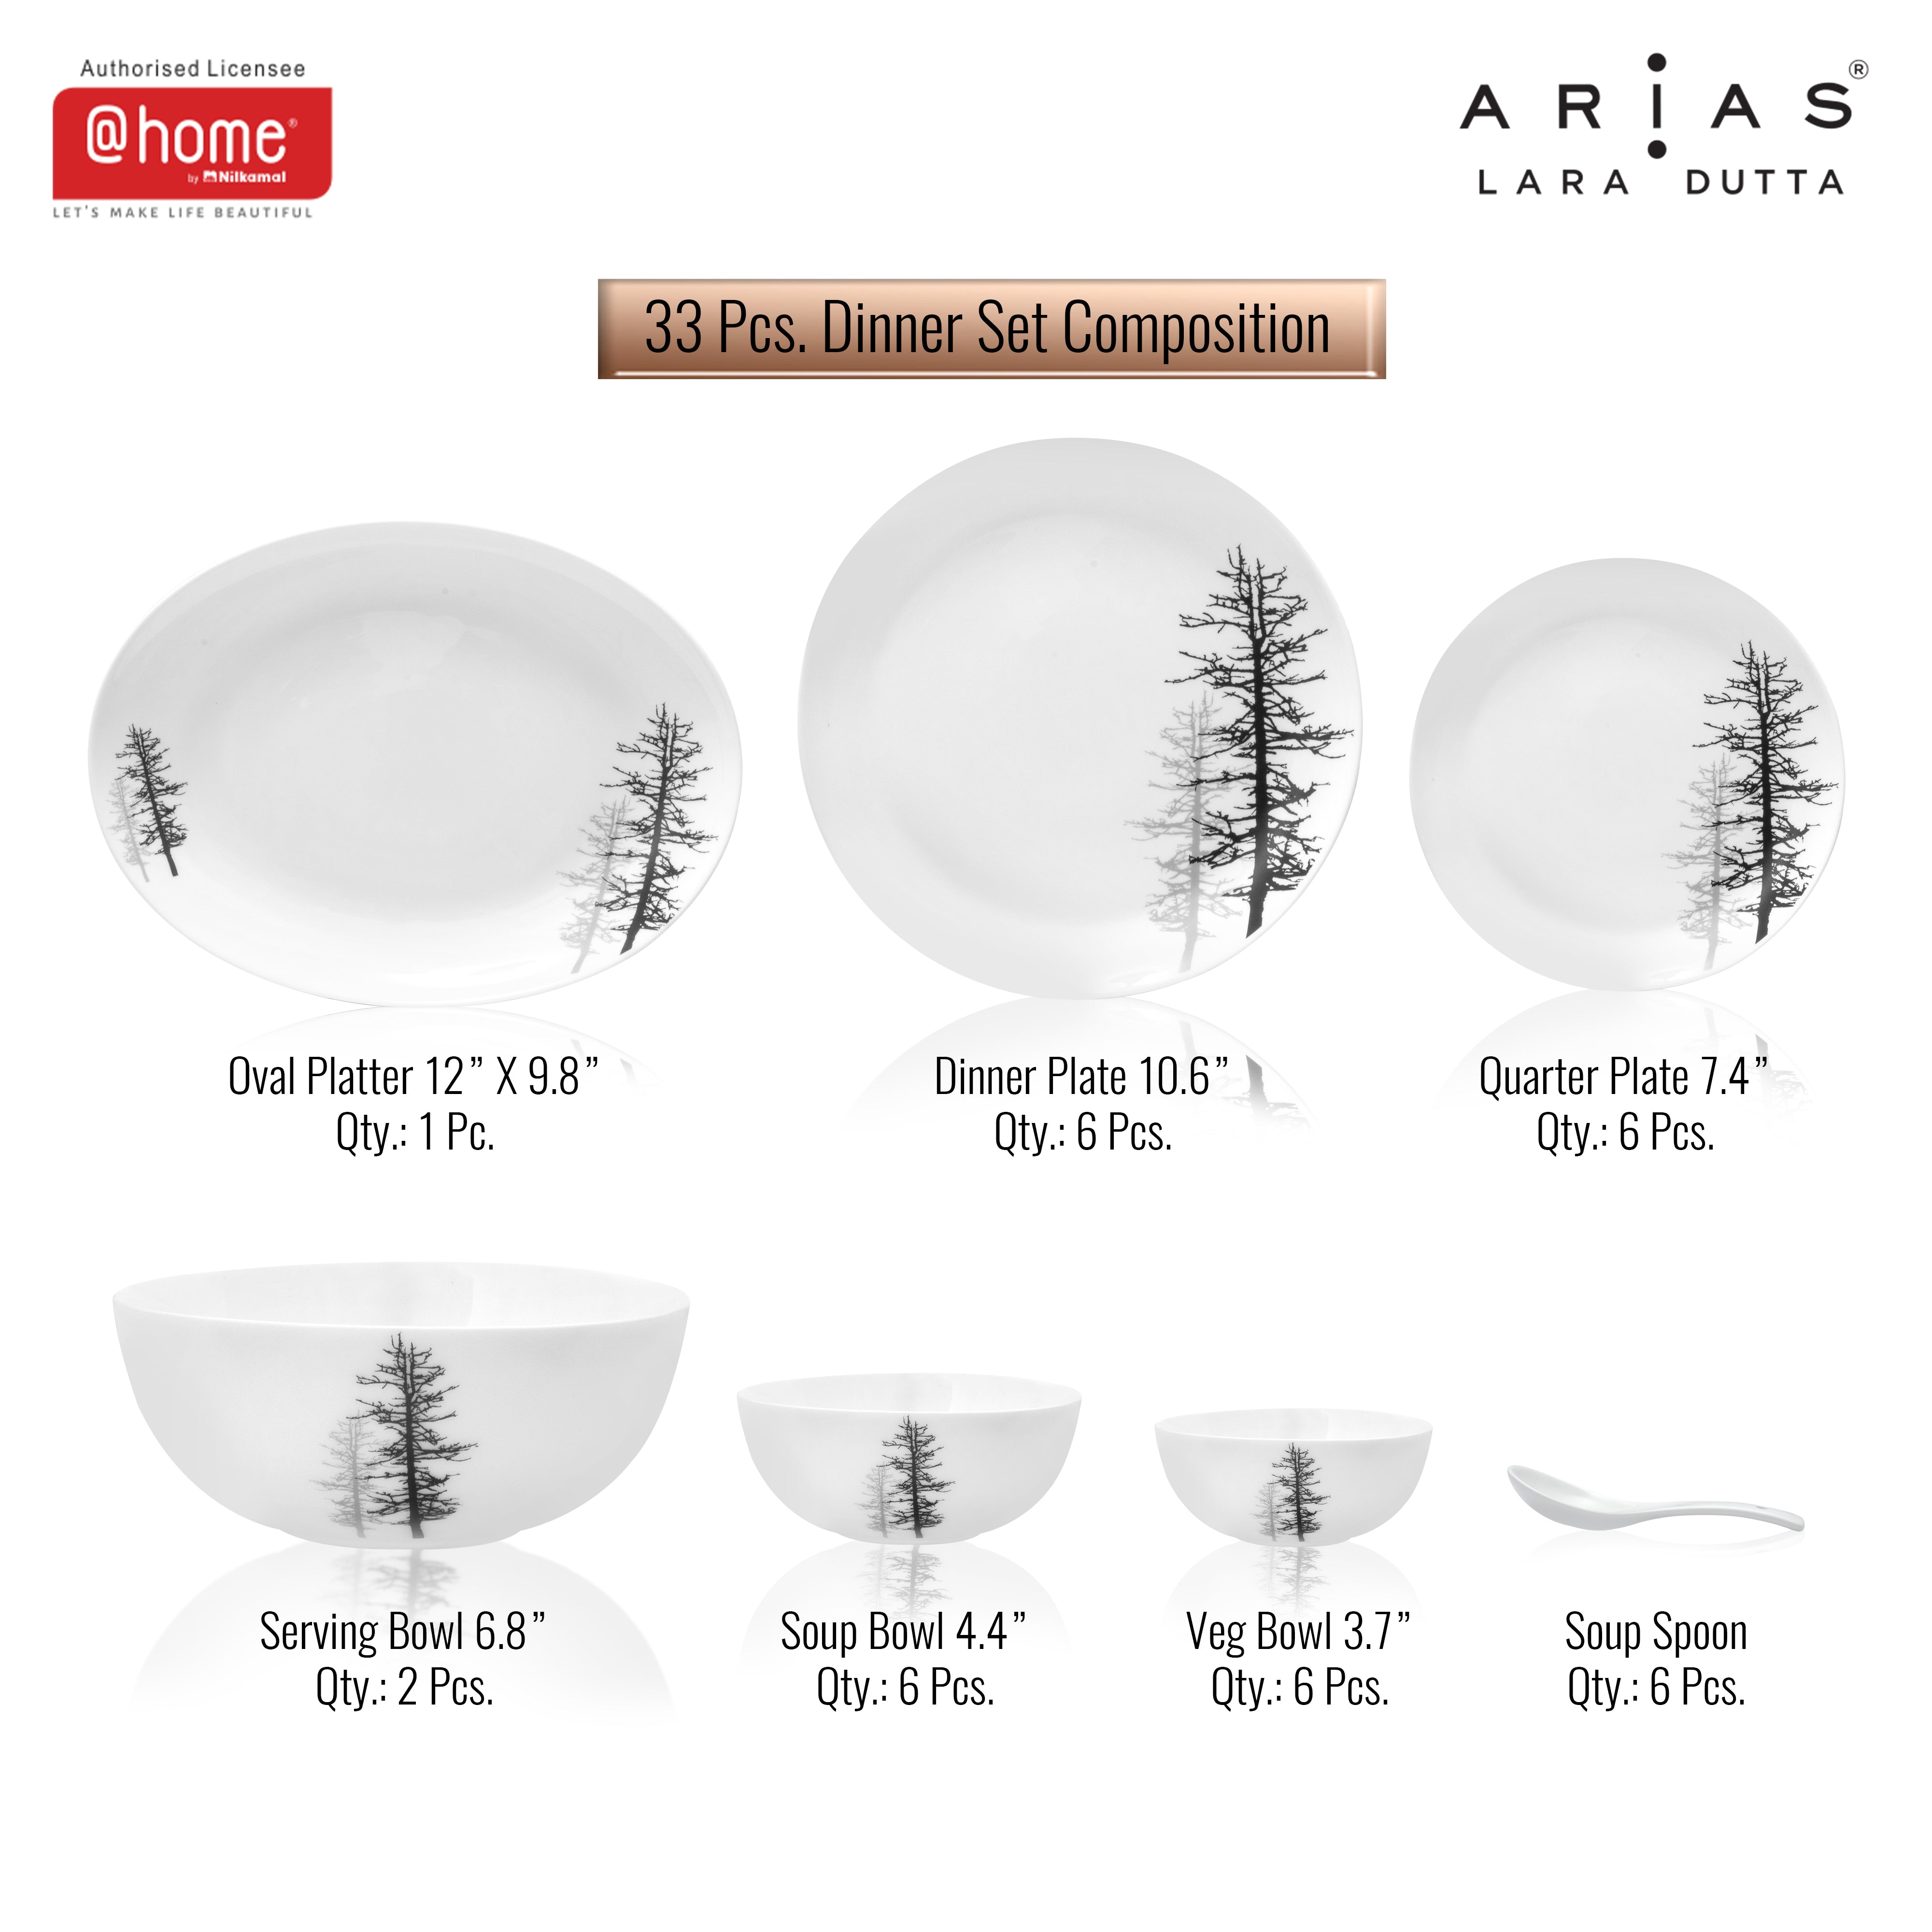 Arias Moon Winter Forest Dinner Set - 33 Pieces